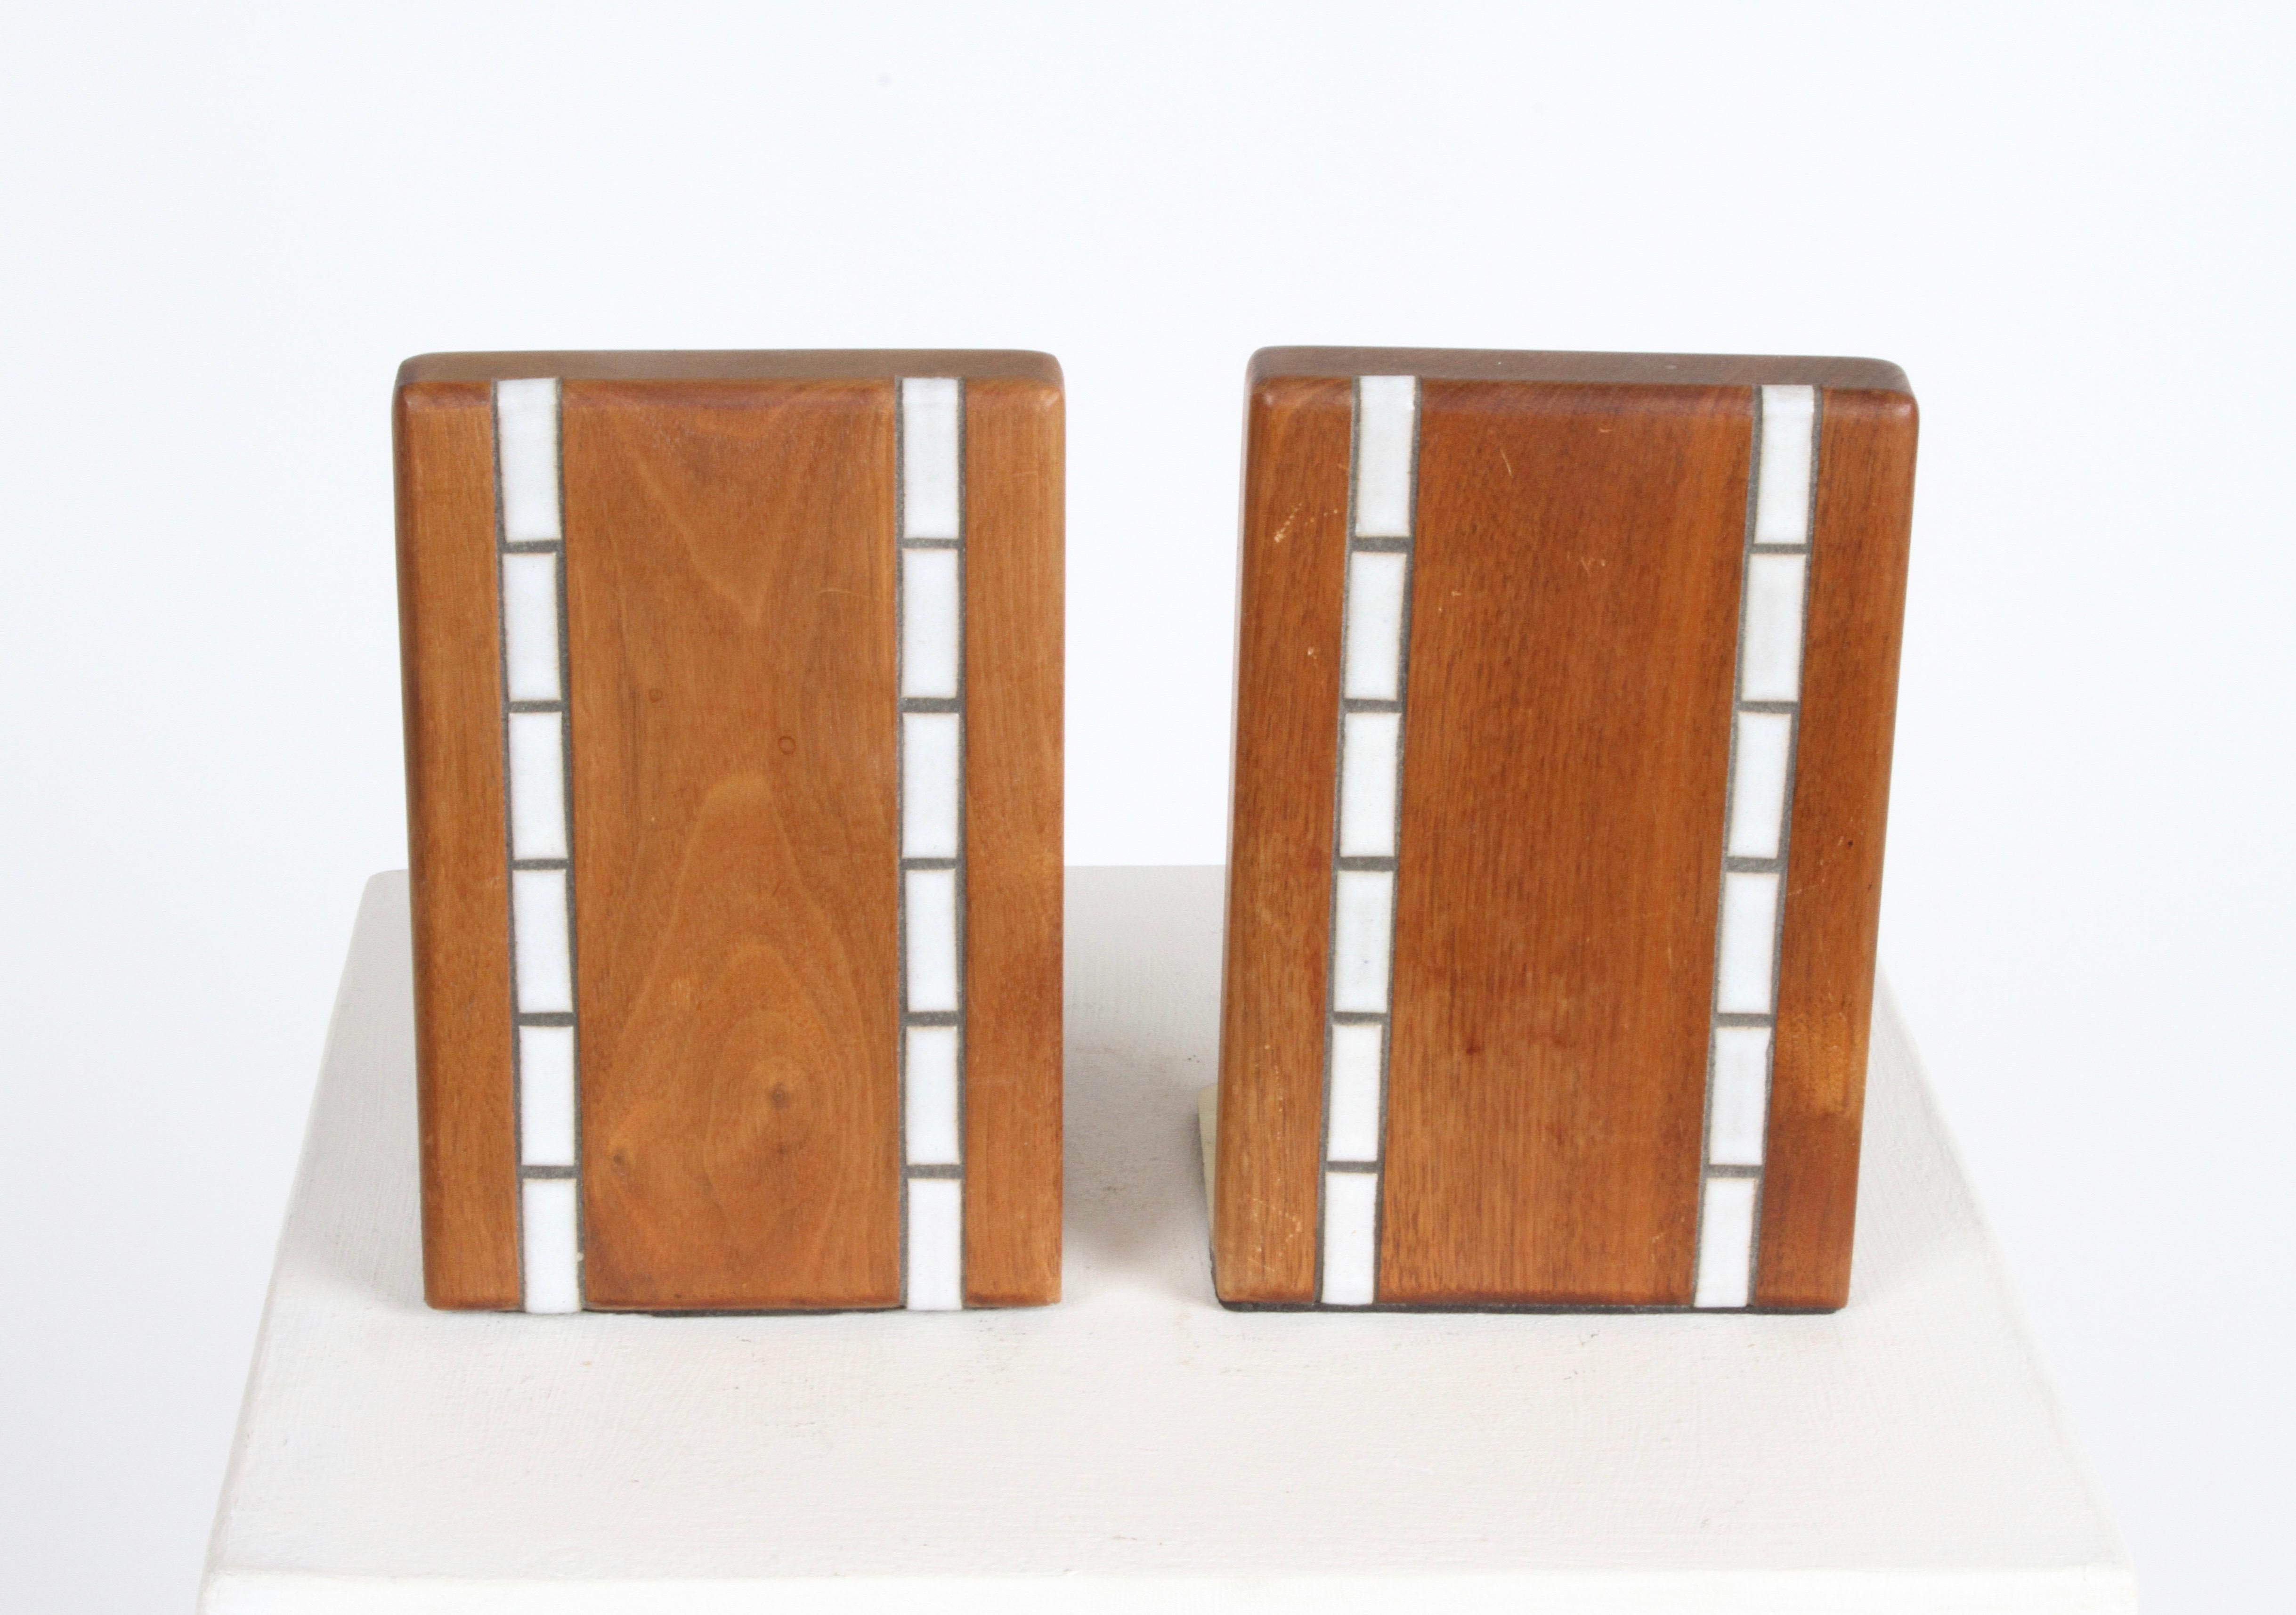 Pair of Mid-Century Modern walnut bookends with vertical white inset tiles by Jane & Gordon Martz for Marshall Studios on brass bases. Very nice original condition.